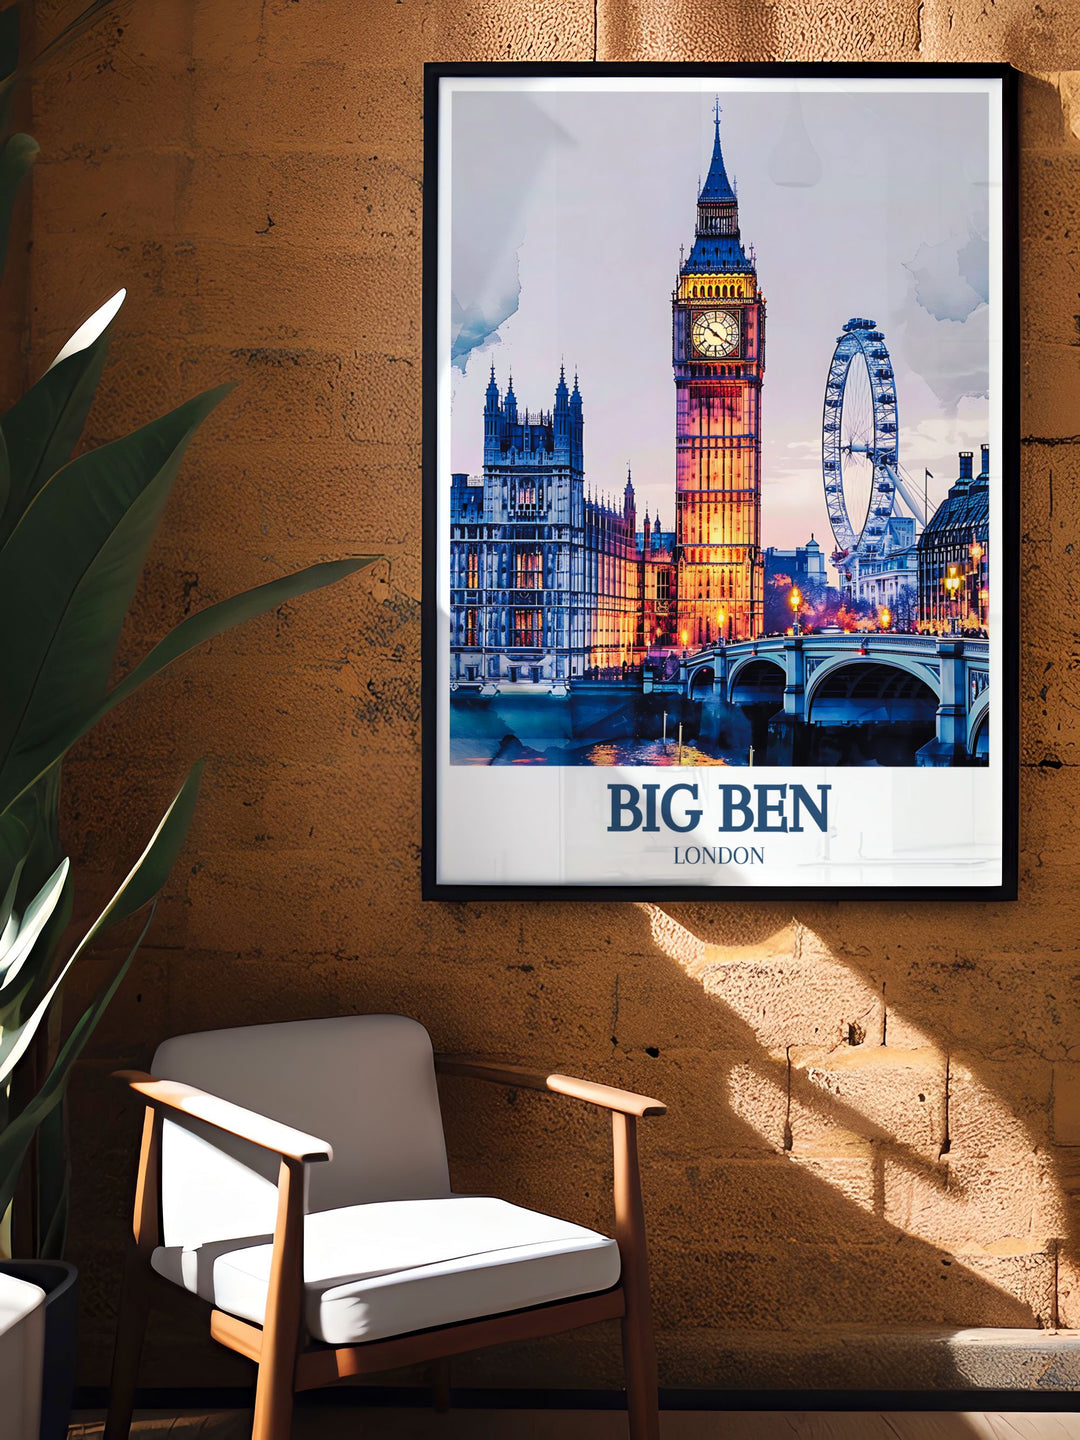 High quality print of Big Ben, the Houses of Parliament, and the London Eye in London, capturing the stunning landmarks and scenic views of this historic city. Ideal for art lovers who appreciate both architecture and nature.